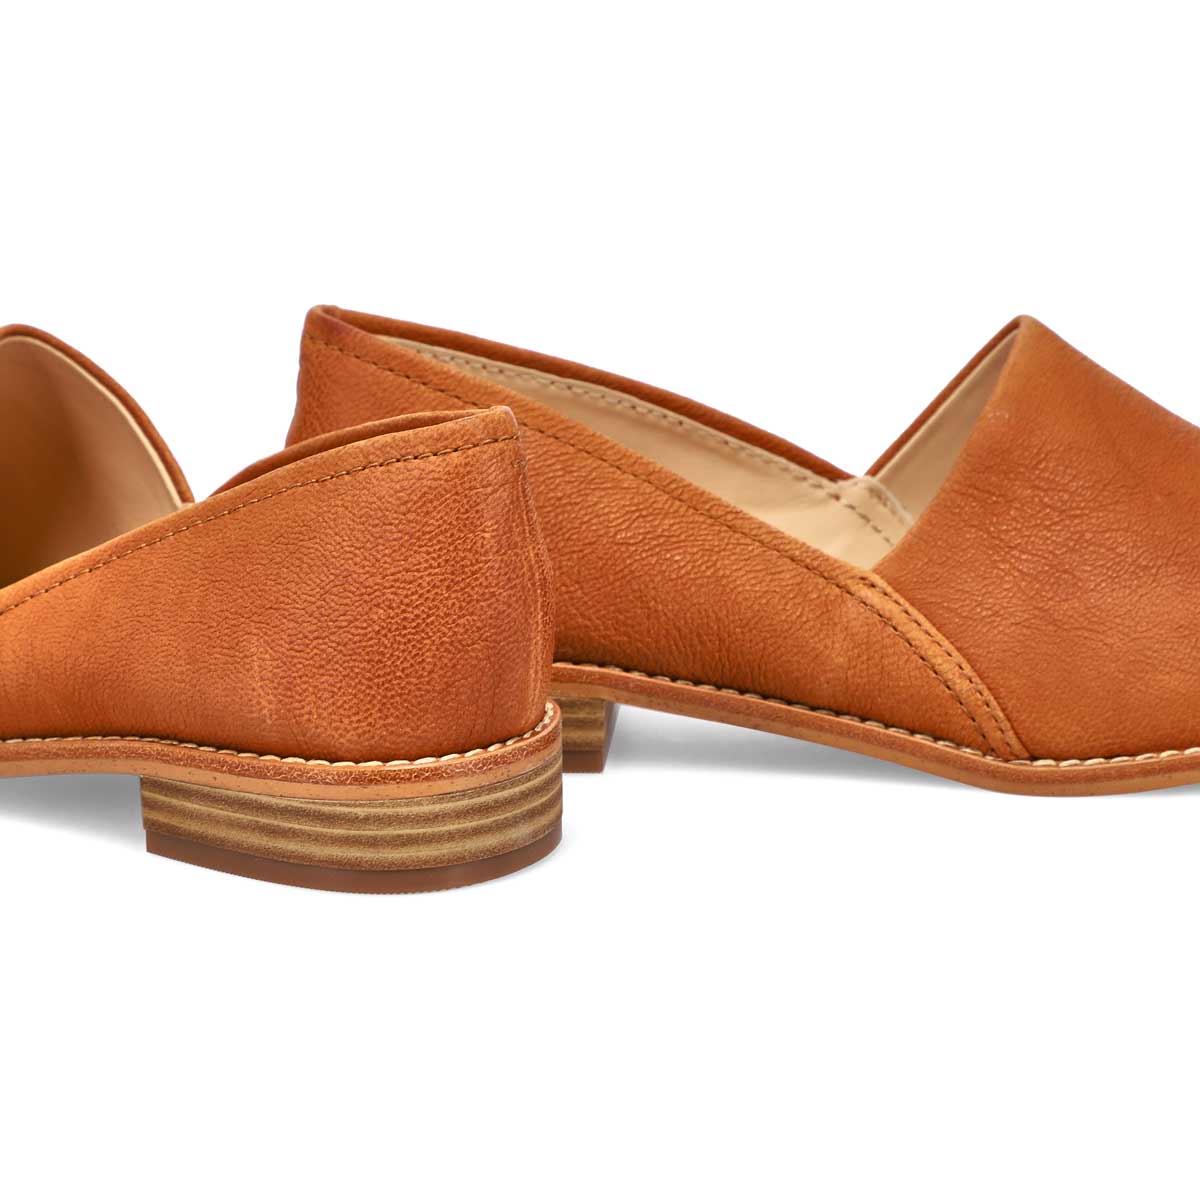 Women's Pure Easy Loafer - Tan